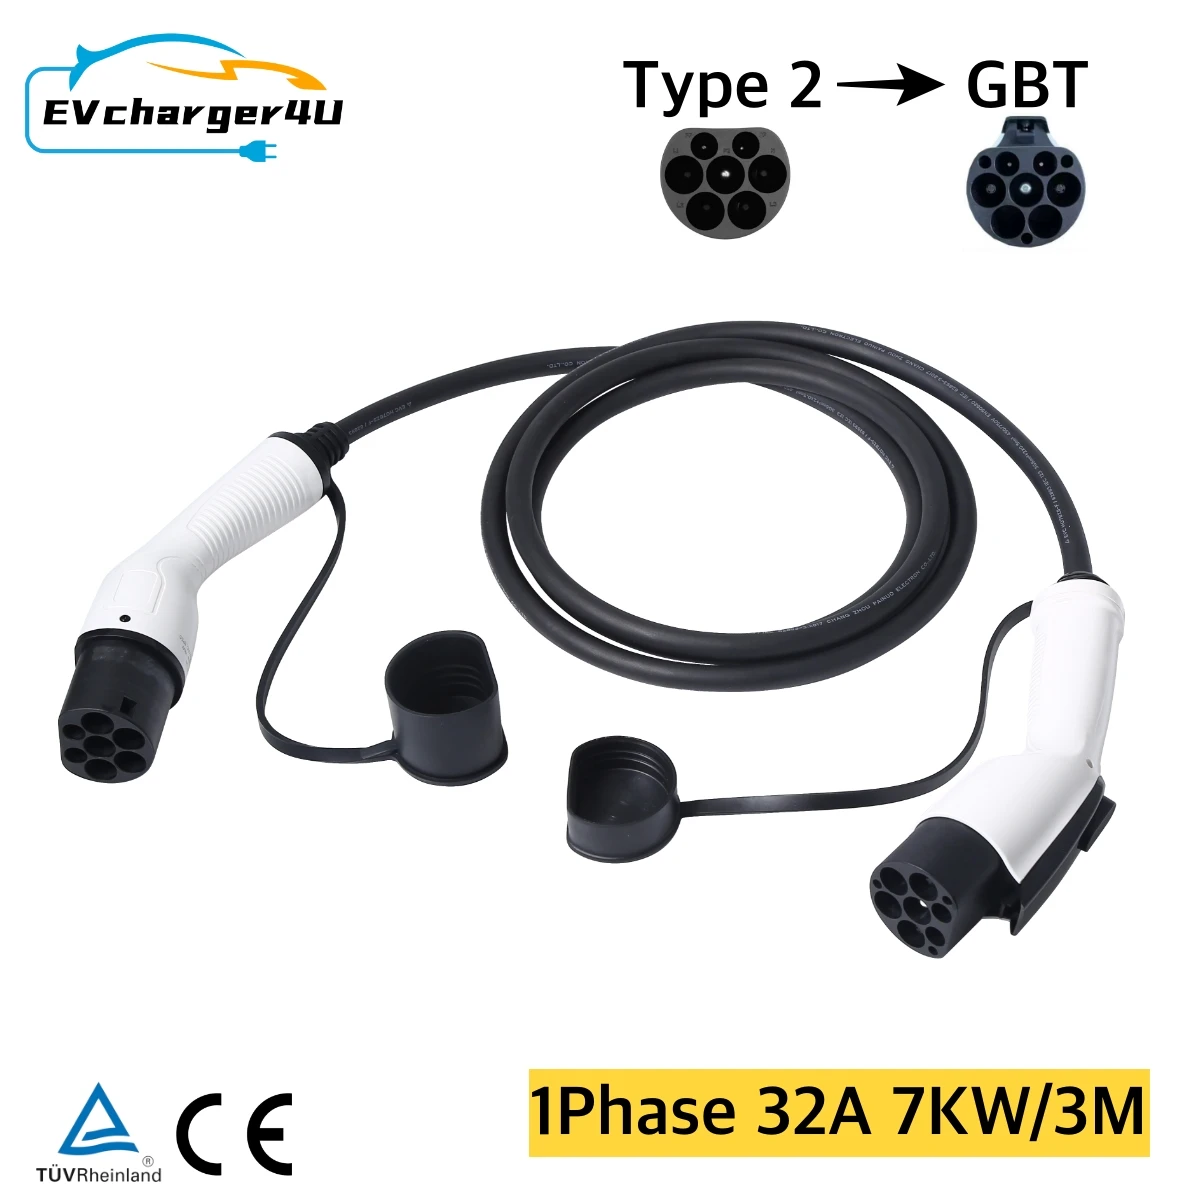 

EVcharger4U Type2 to GBT EV Charging Cable 1Phase 32A 7KW 3M Electric Vehicle Type 2 Cord GB/T for Charger Station